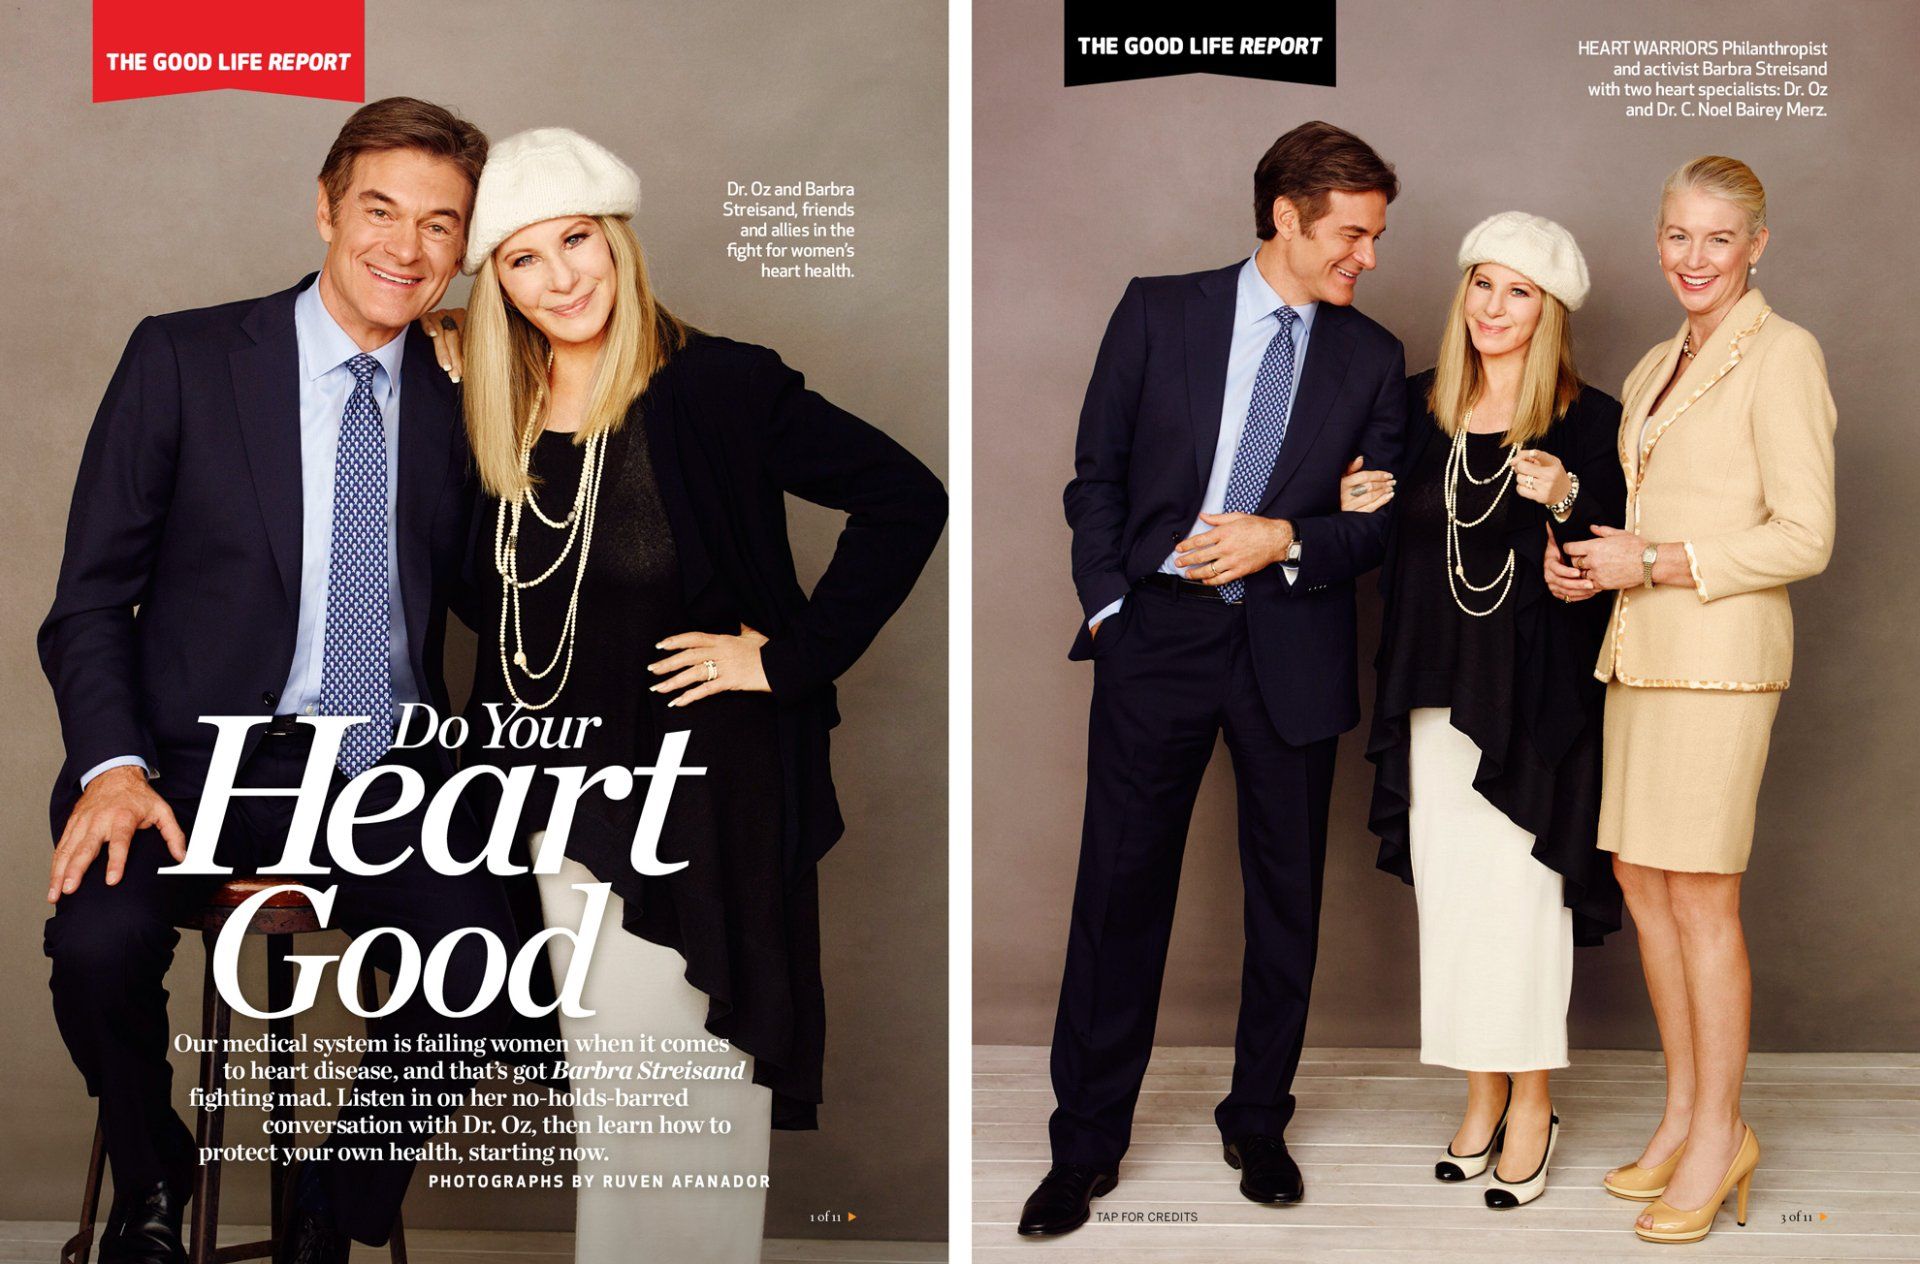 Pages with photos of Streisand from Dr. Oz magazine, December 2014